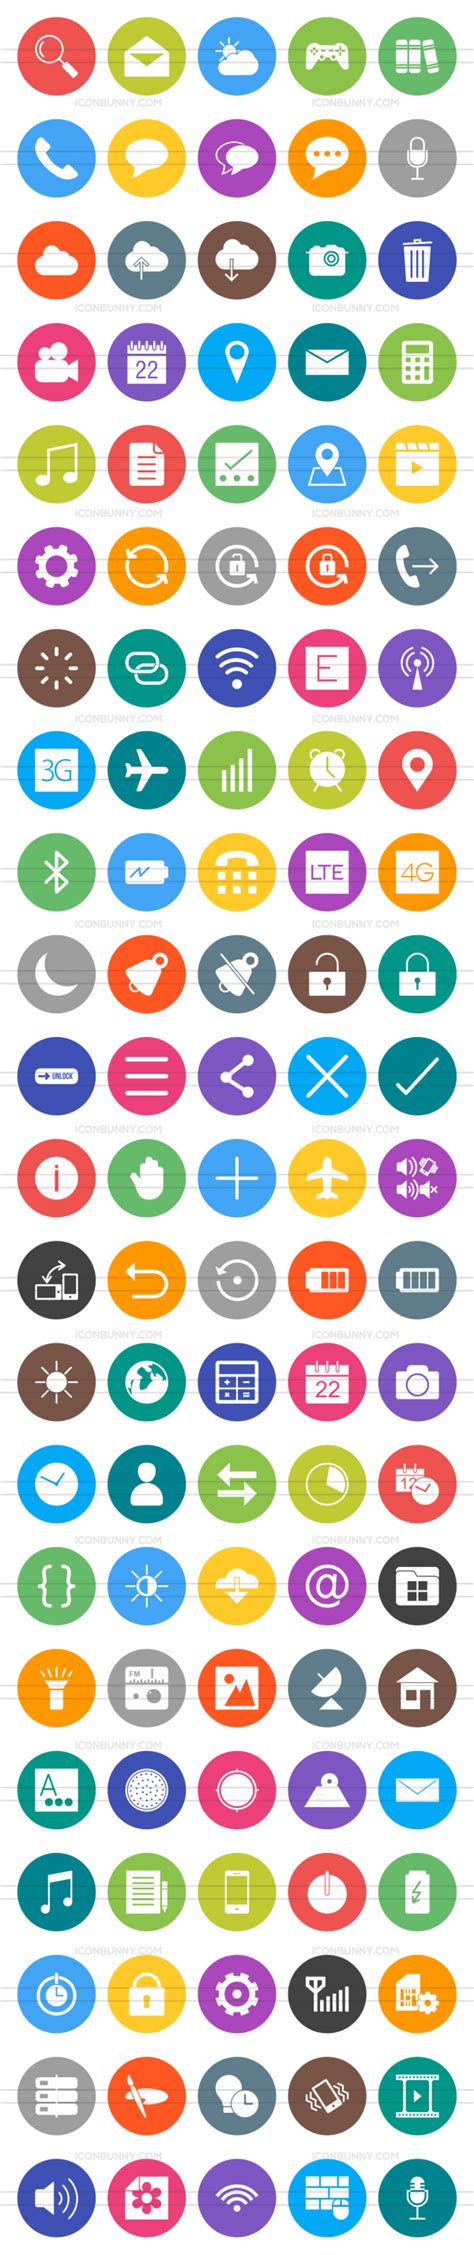 110 Mobile Apps Flat Round Icons Iconbunny